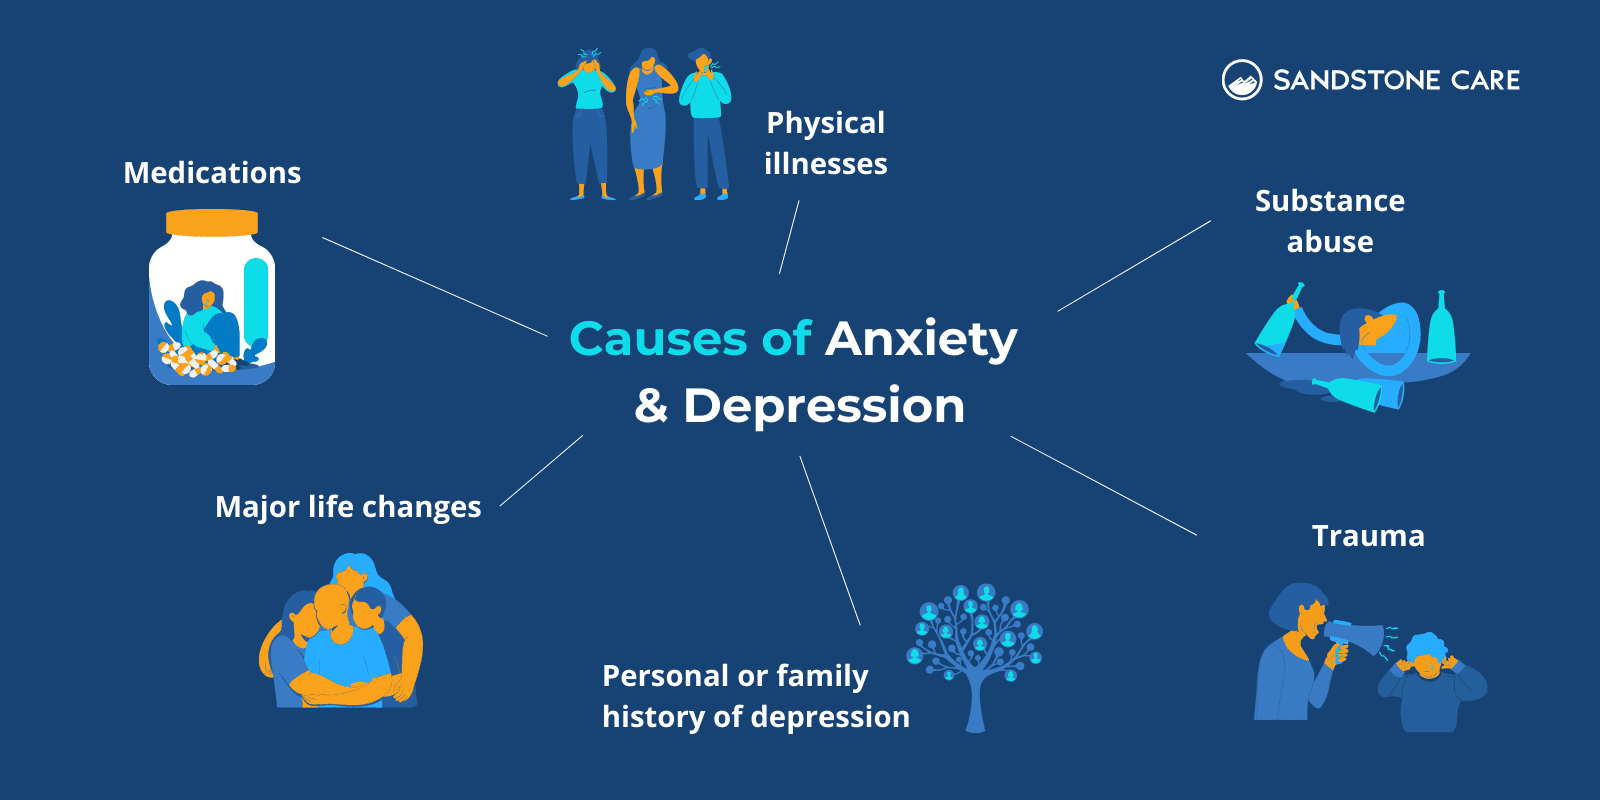 "Causes of Anxiety & Depression" text in the middle surrounded by relevant illustrations representing different causes